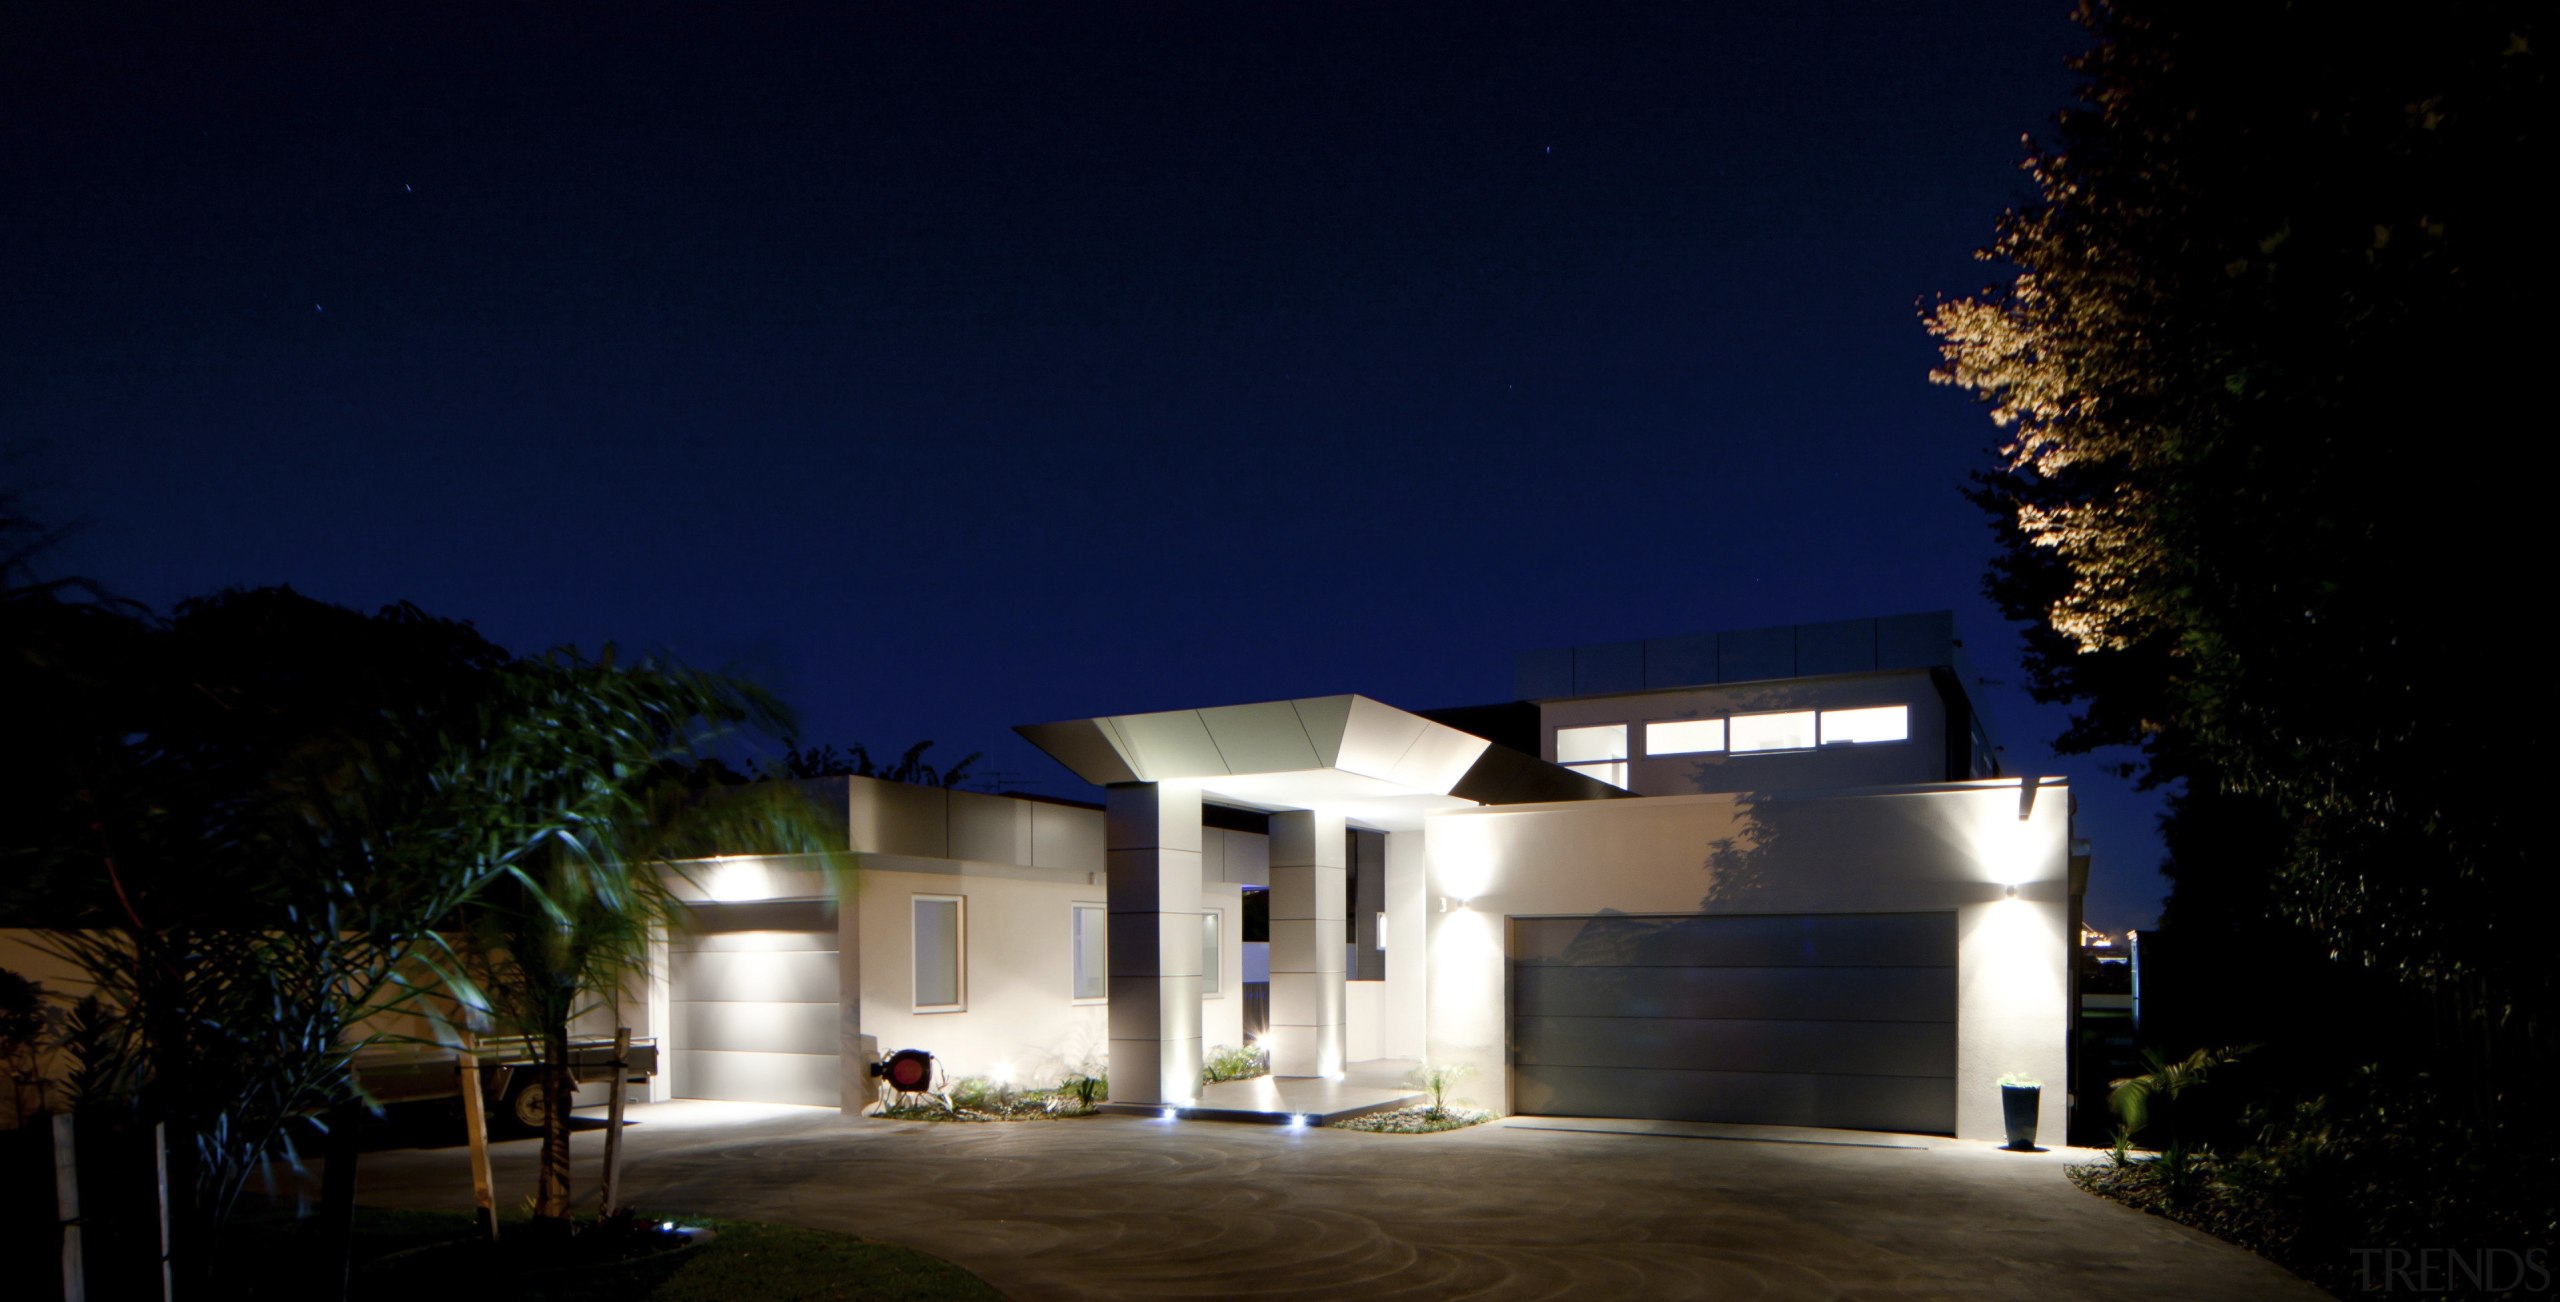 This house was designed and built by Signature architecture, building, darkness, estate, facade, home, house, landscape lighting, light, lighting, night, property, real estate, residential area, sky, blue, black